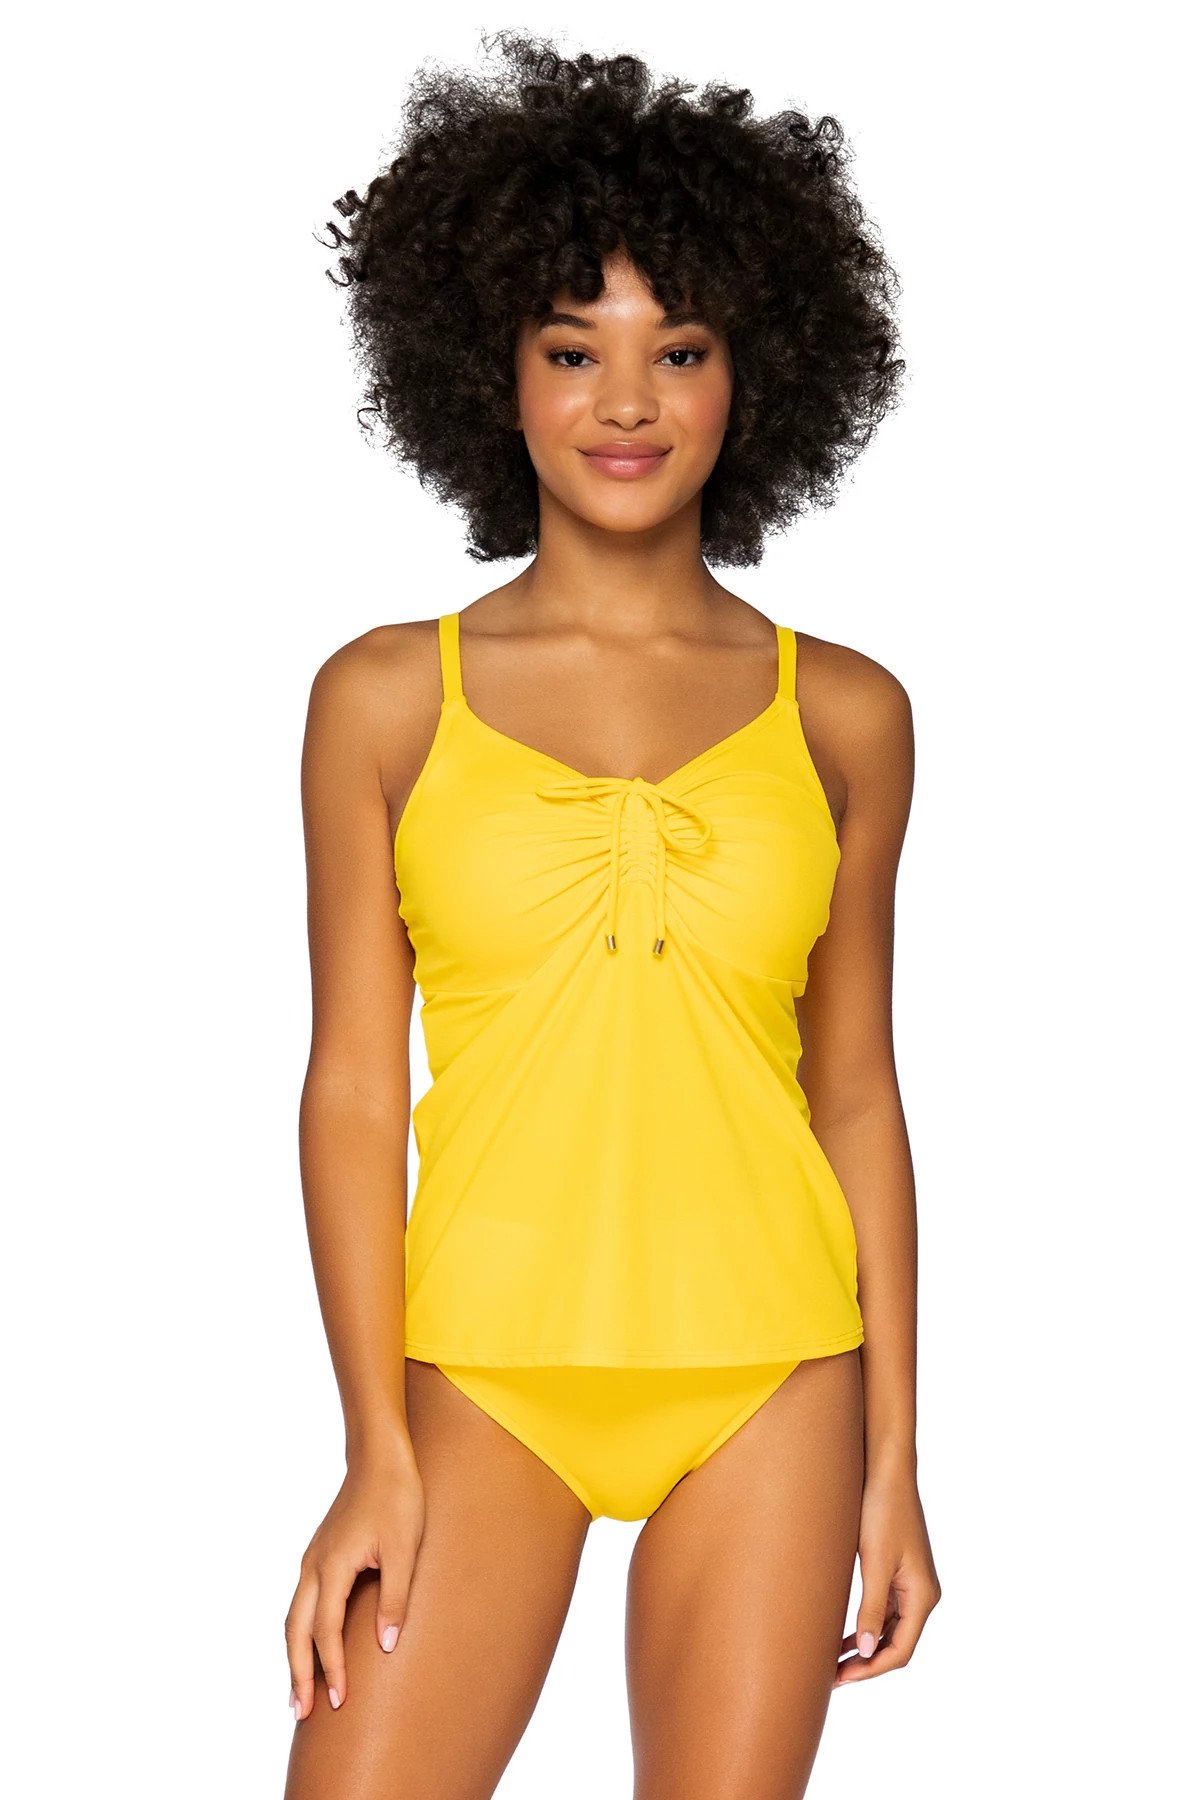 HAWAIIAN SUN Avery Over The Shoulder Tankini Top (E-H Cup) image number 1